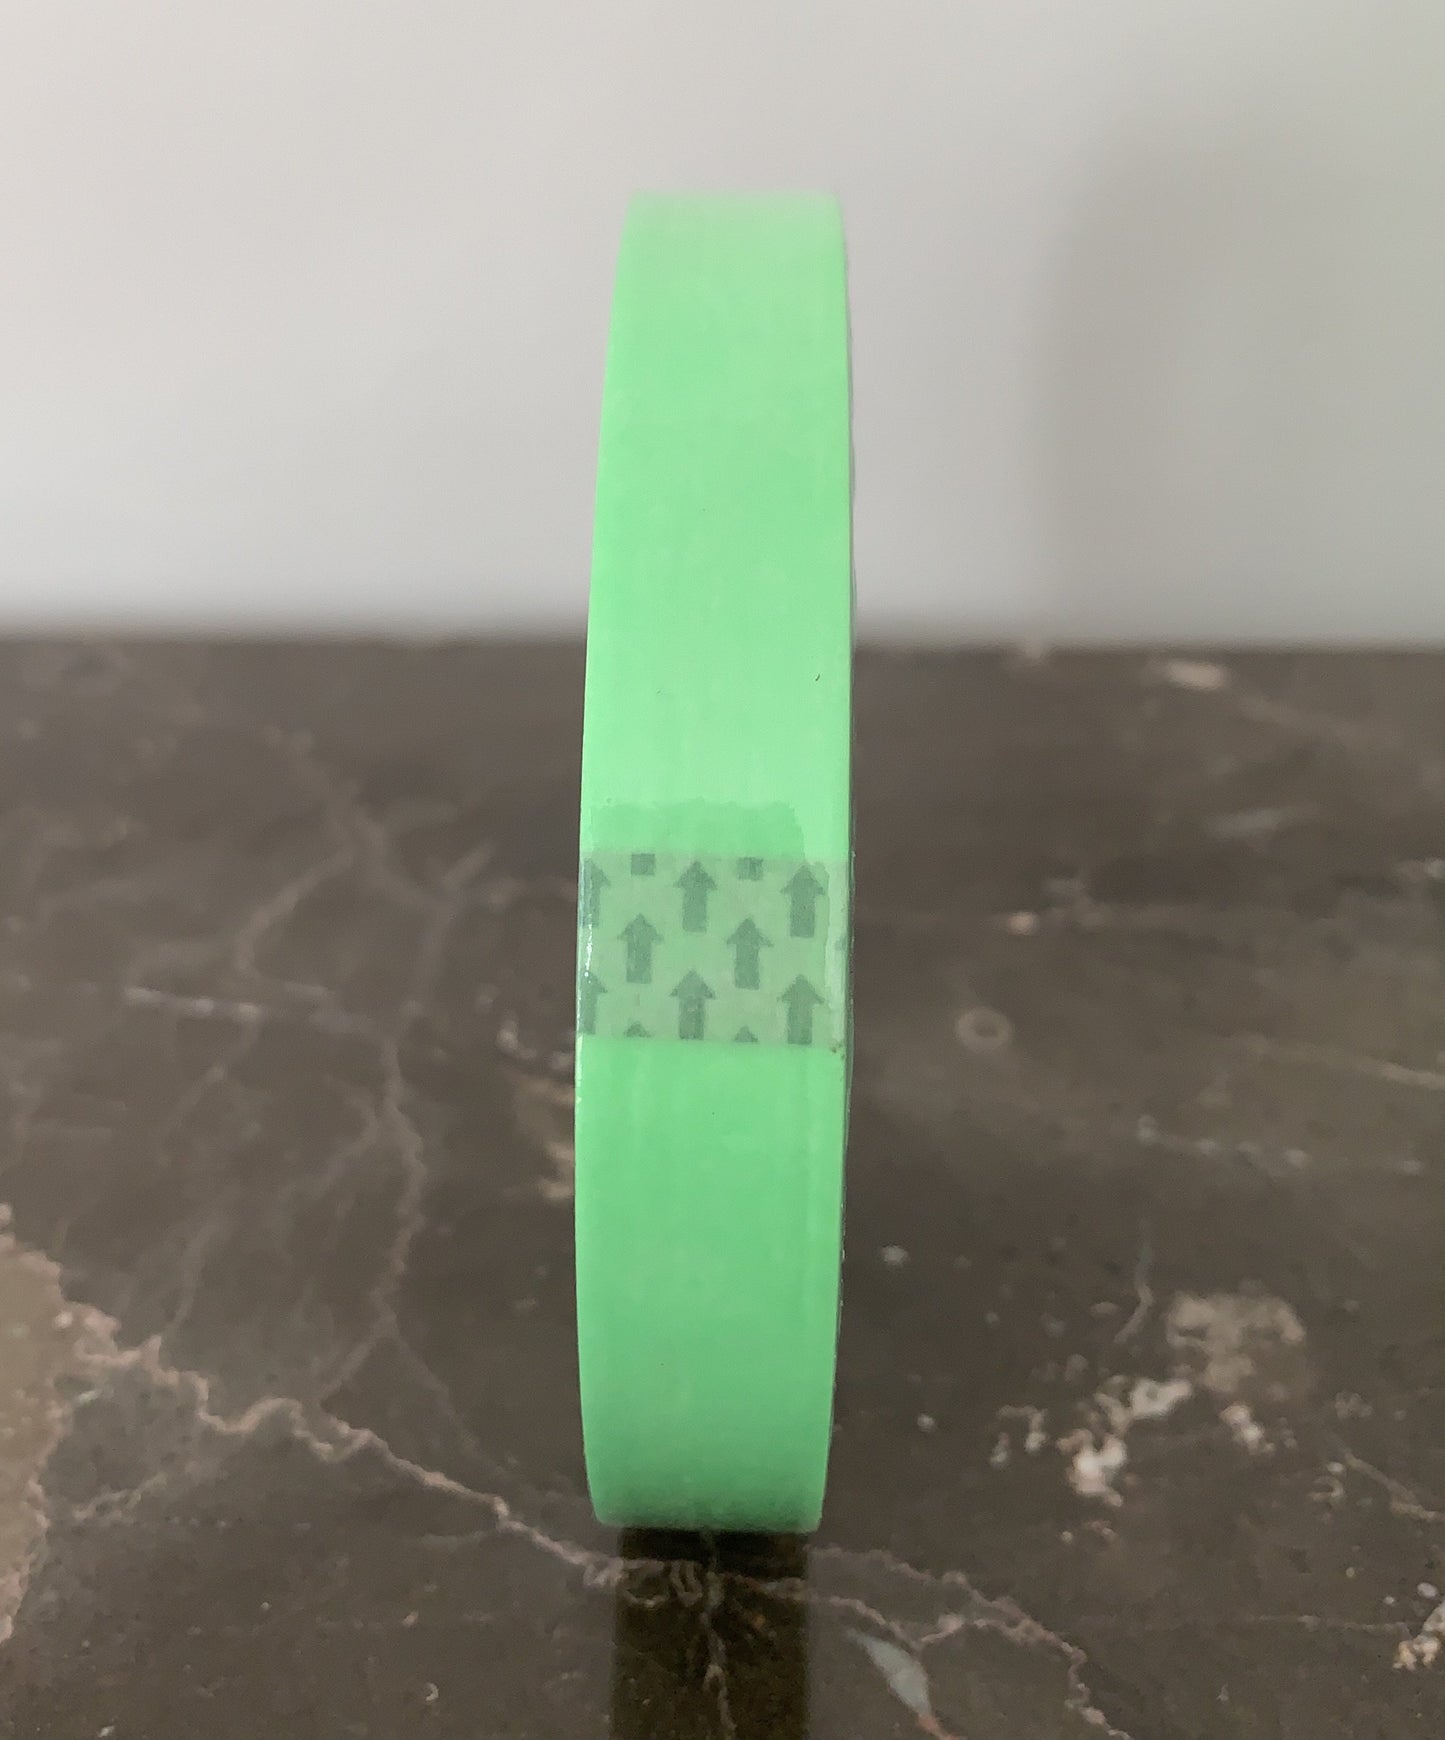 14 Day Green Masking Tape 50m with option of 18, 24, 36, and 48mm